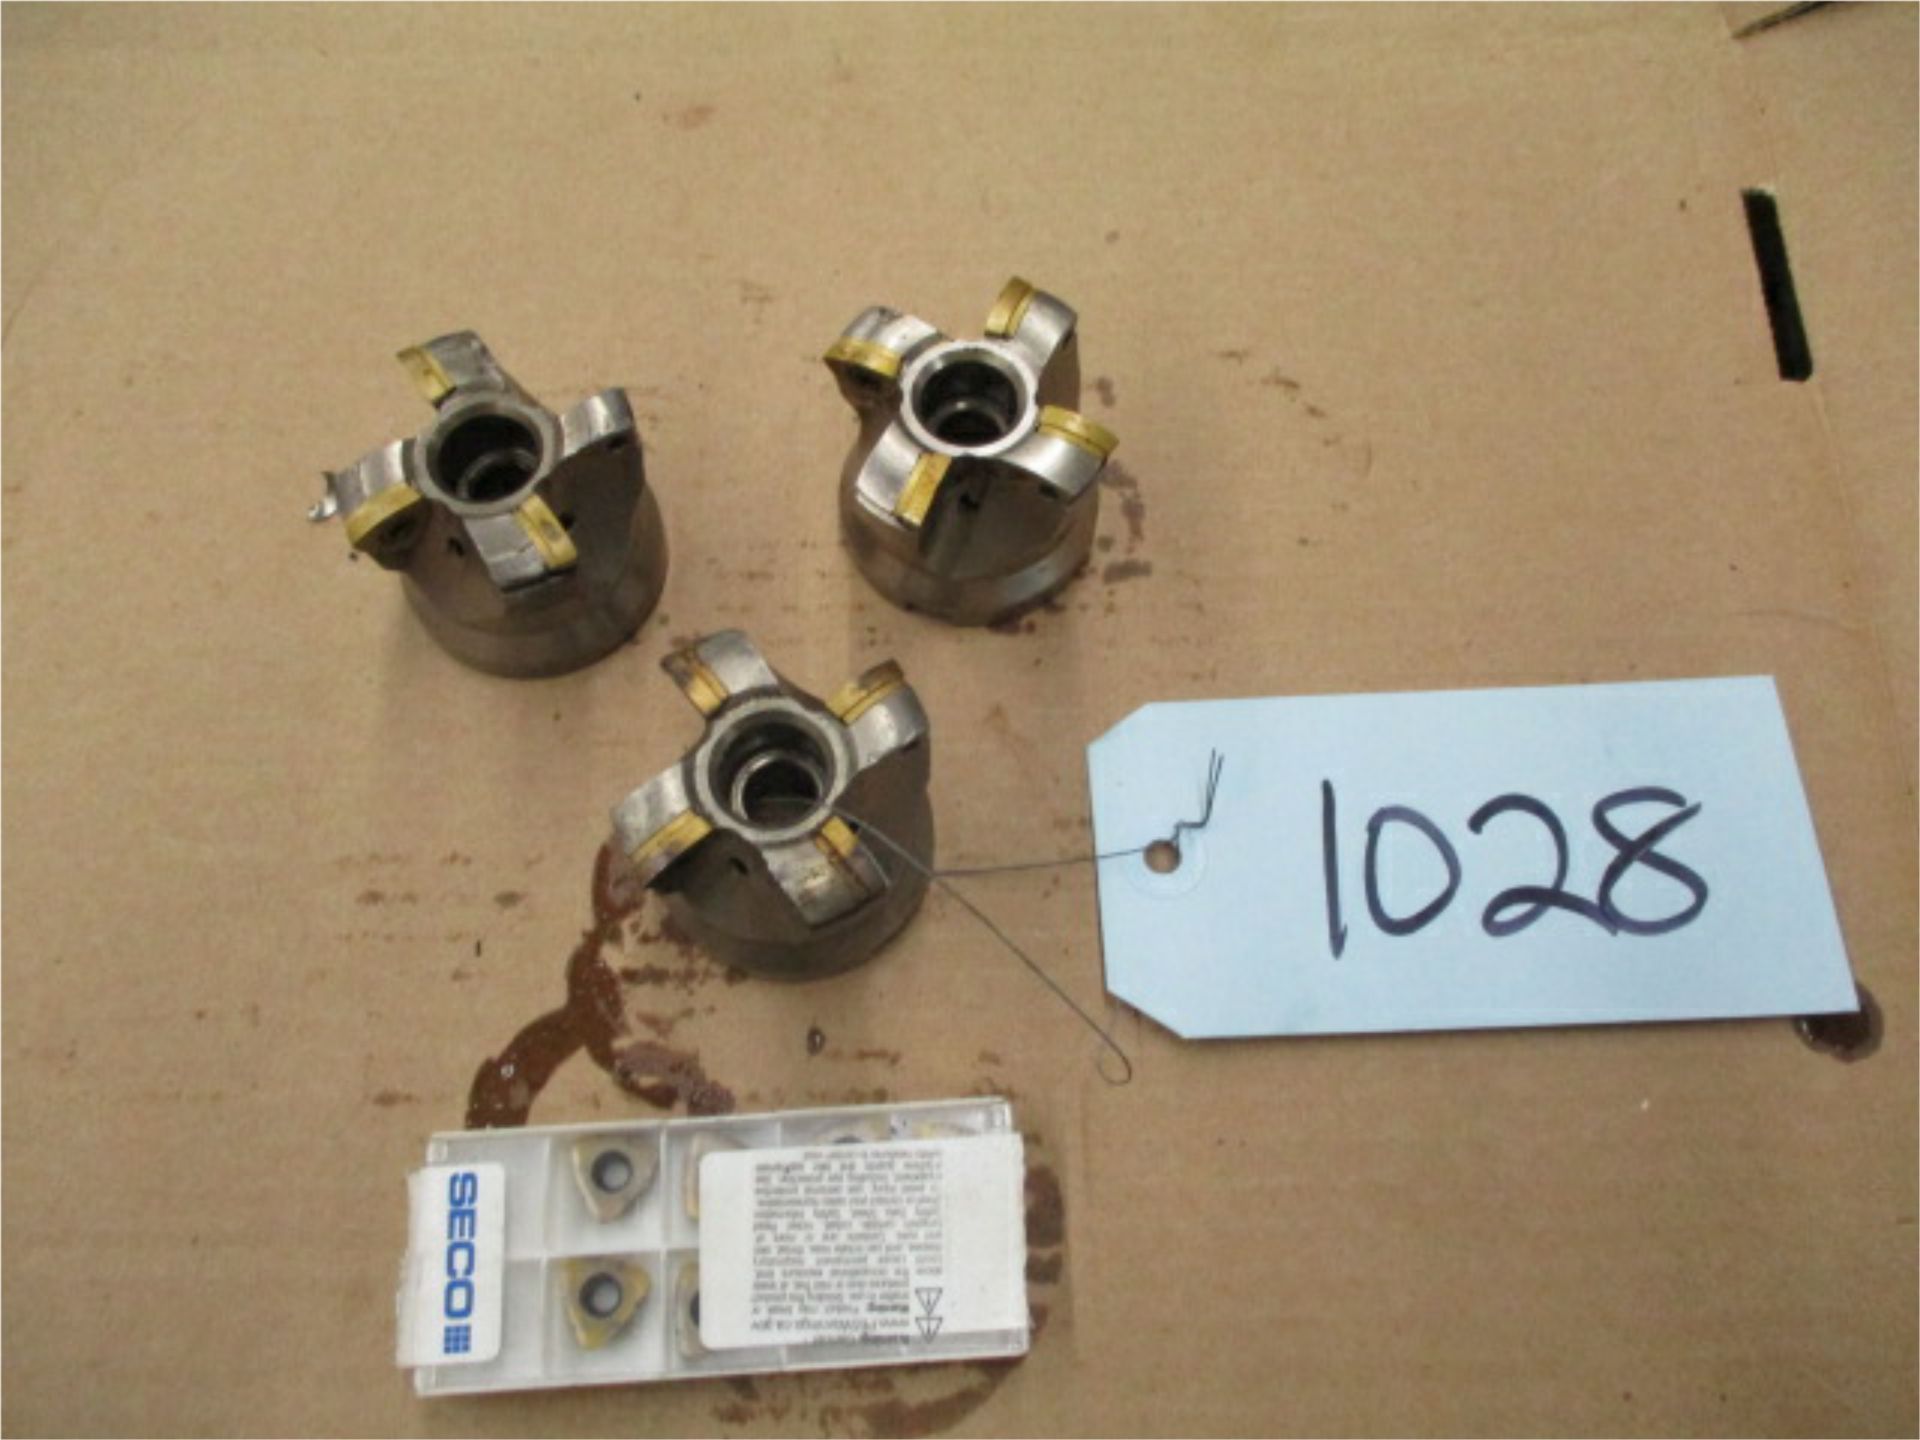 CNC Tooling, 3 pcs. with 1 opened box of inserts